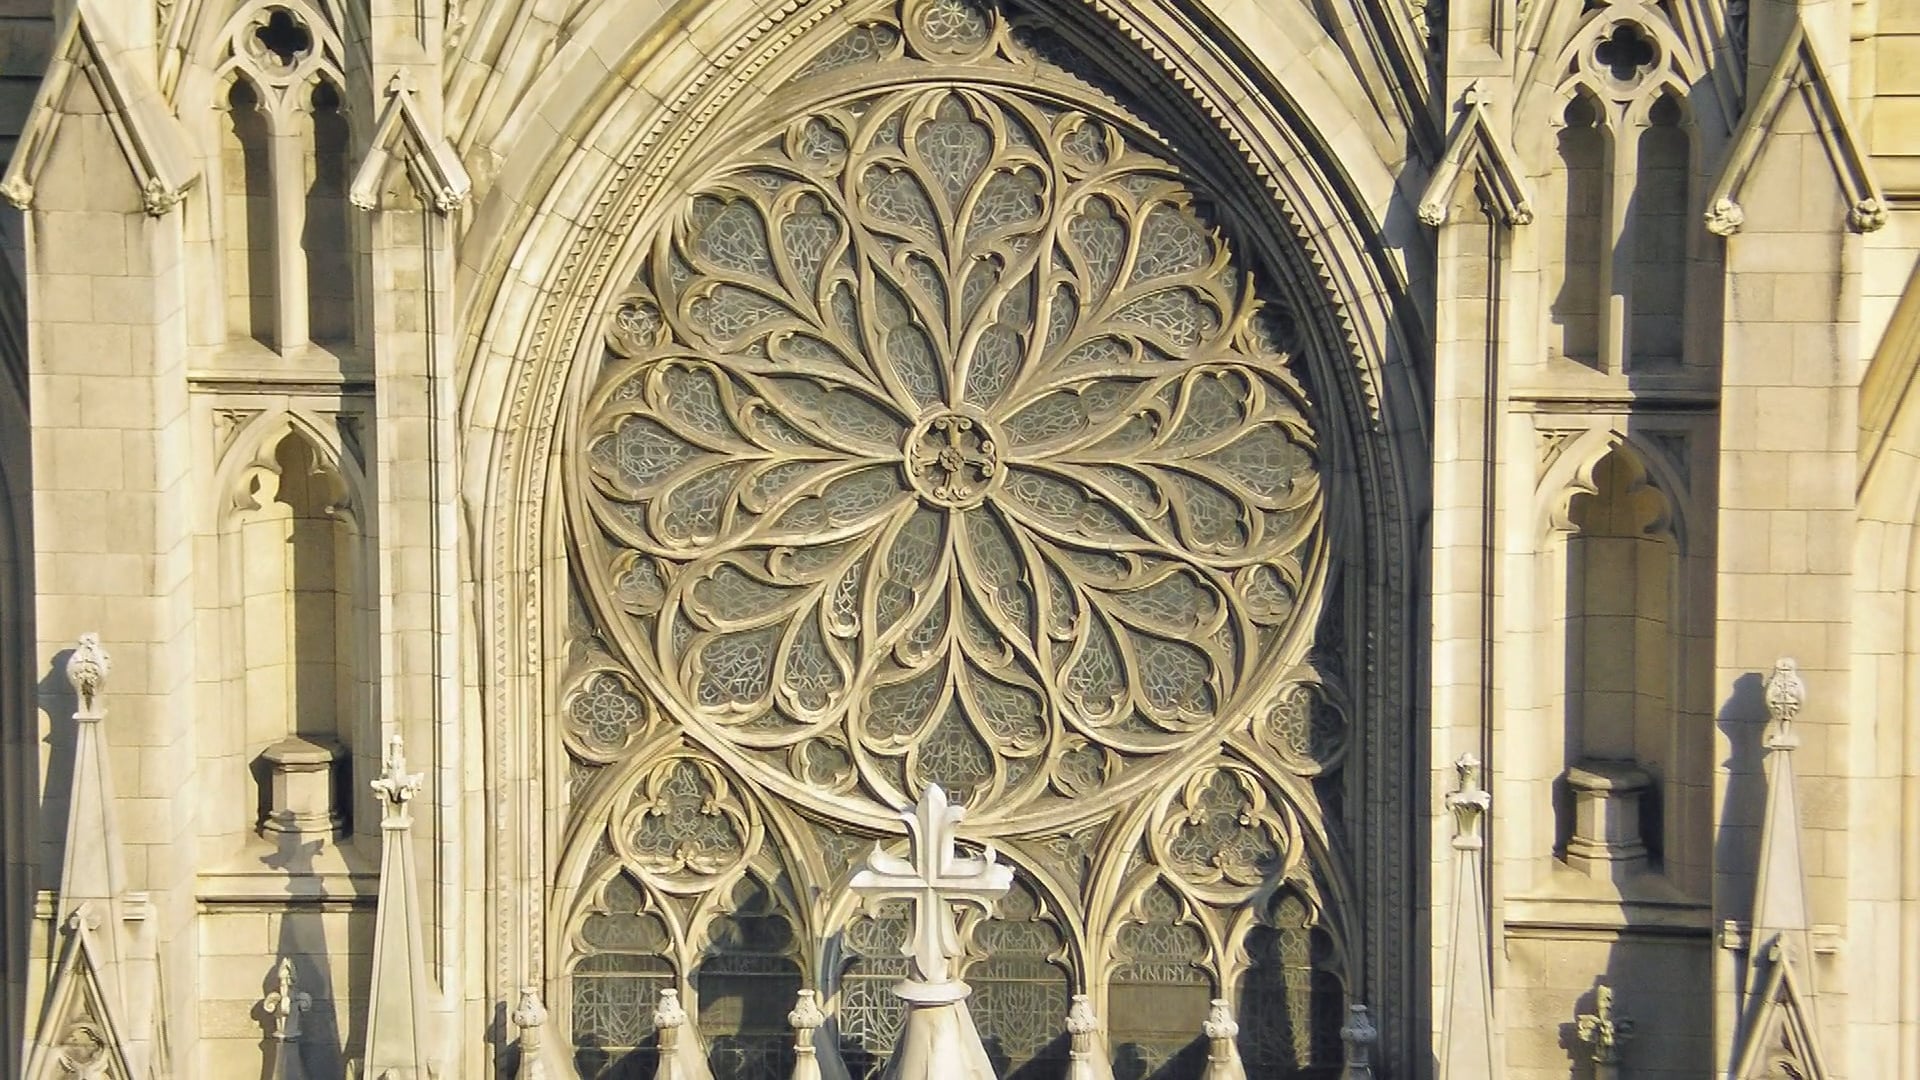 Mass from St. Patrick's Cathedral - May 23, 2022